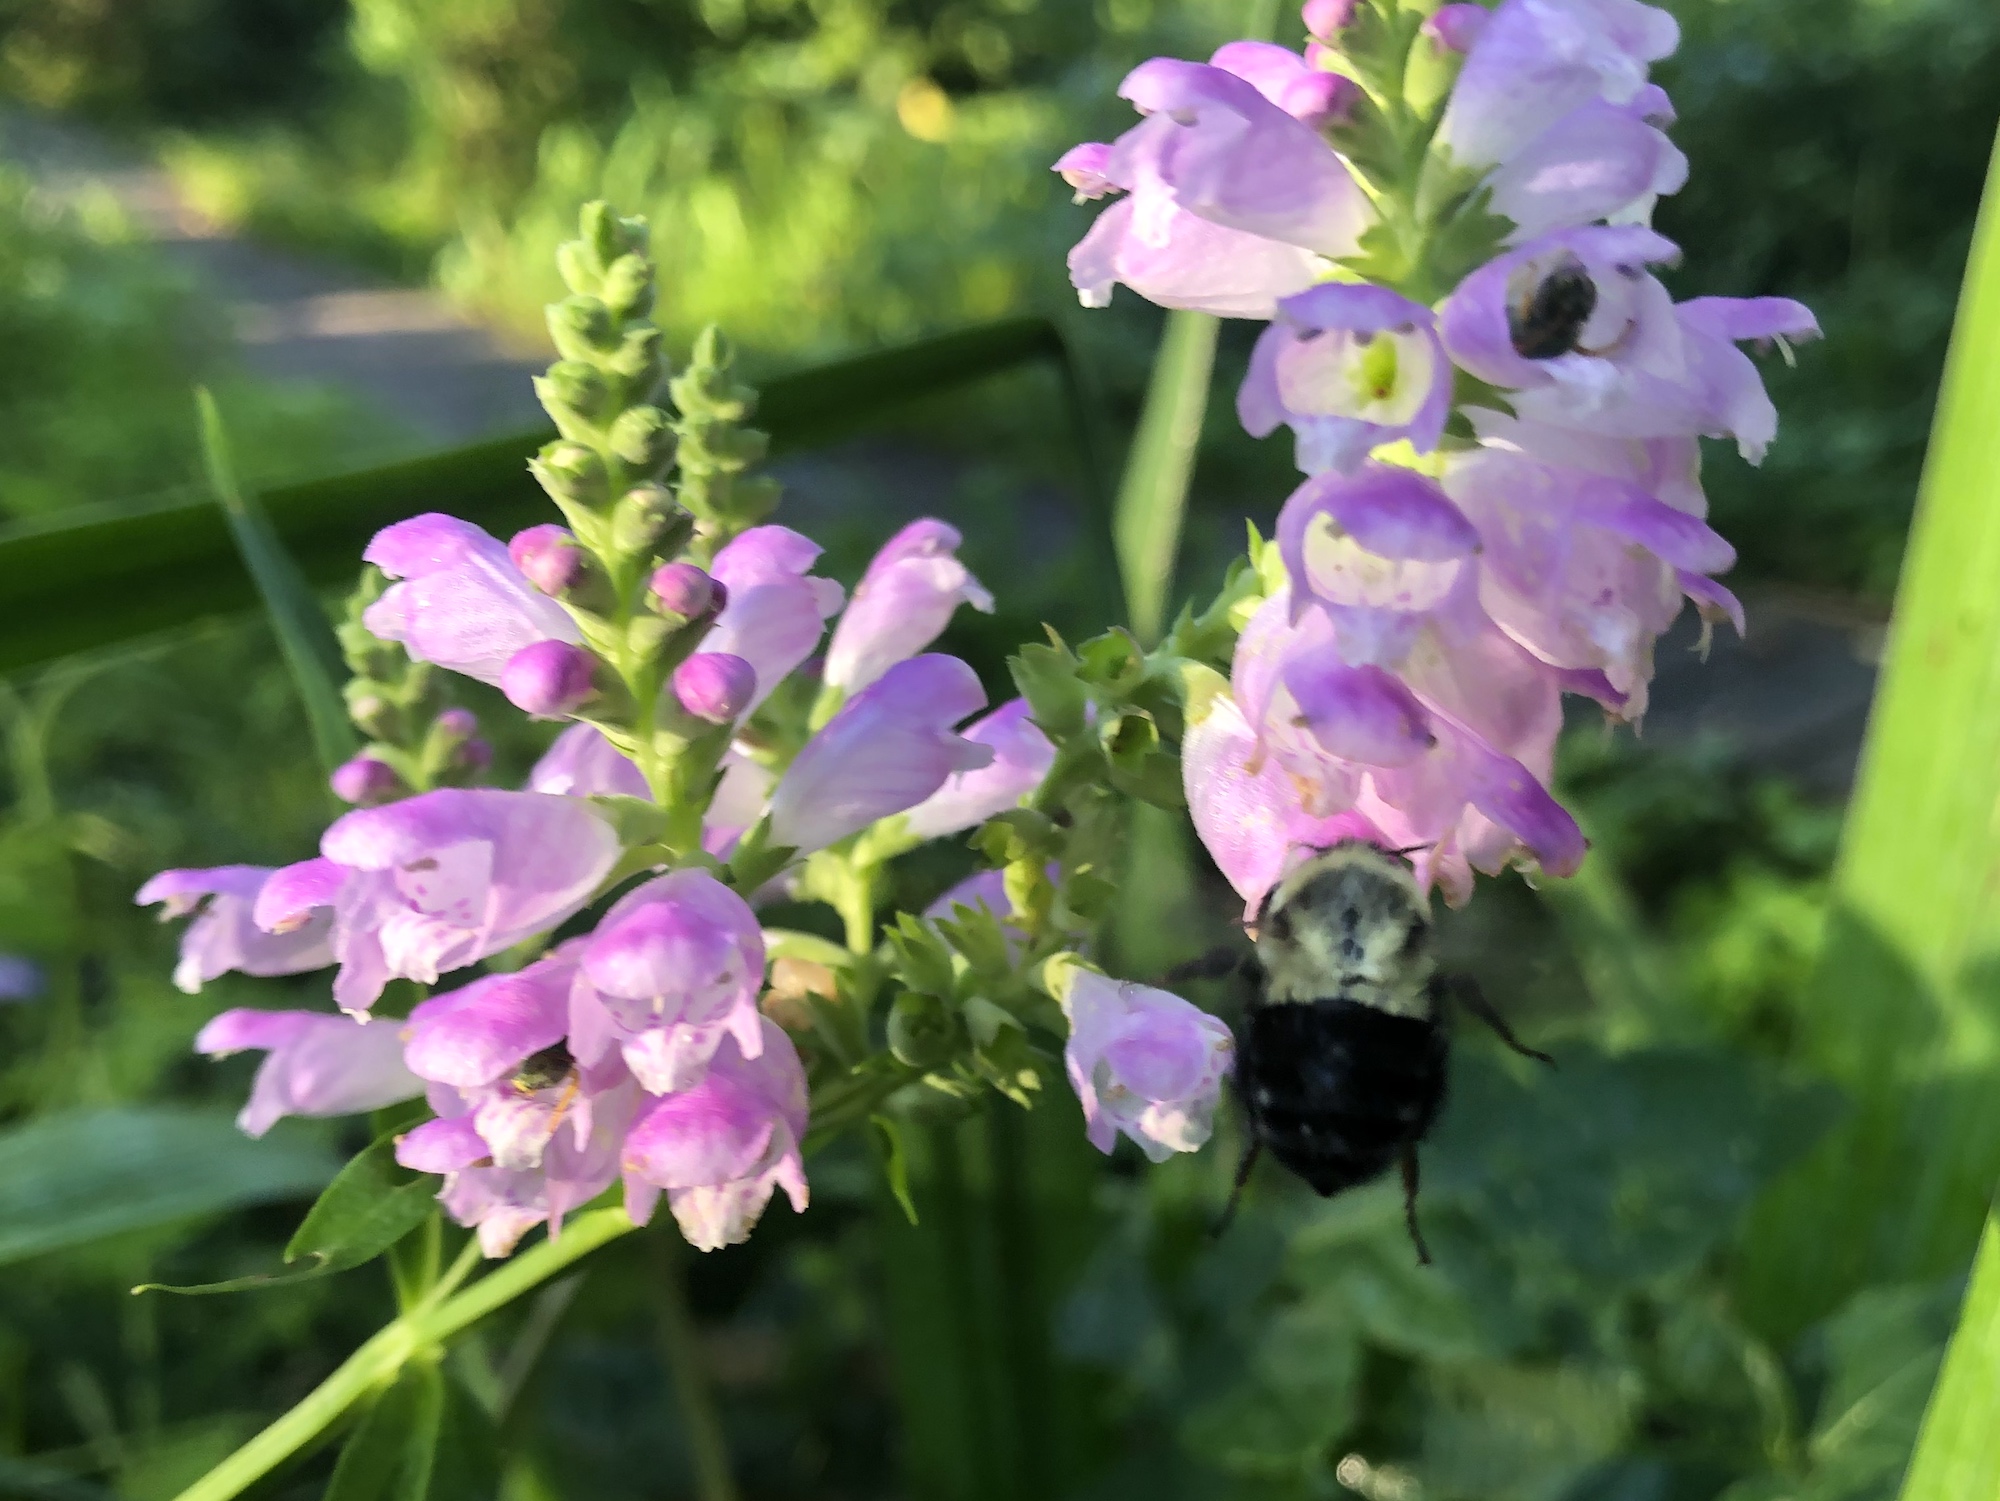 Obedient Plant at source of Dancing Sands spring in Madison, Wisconsin on August 12, 2020.